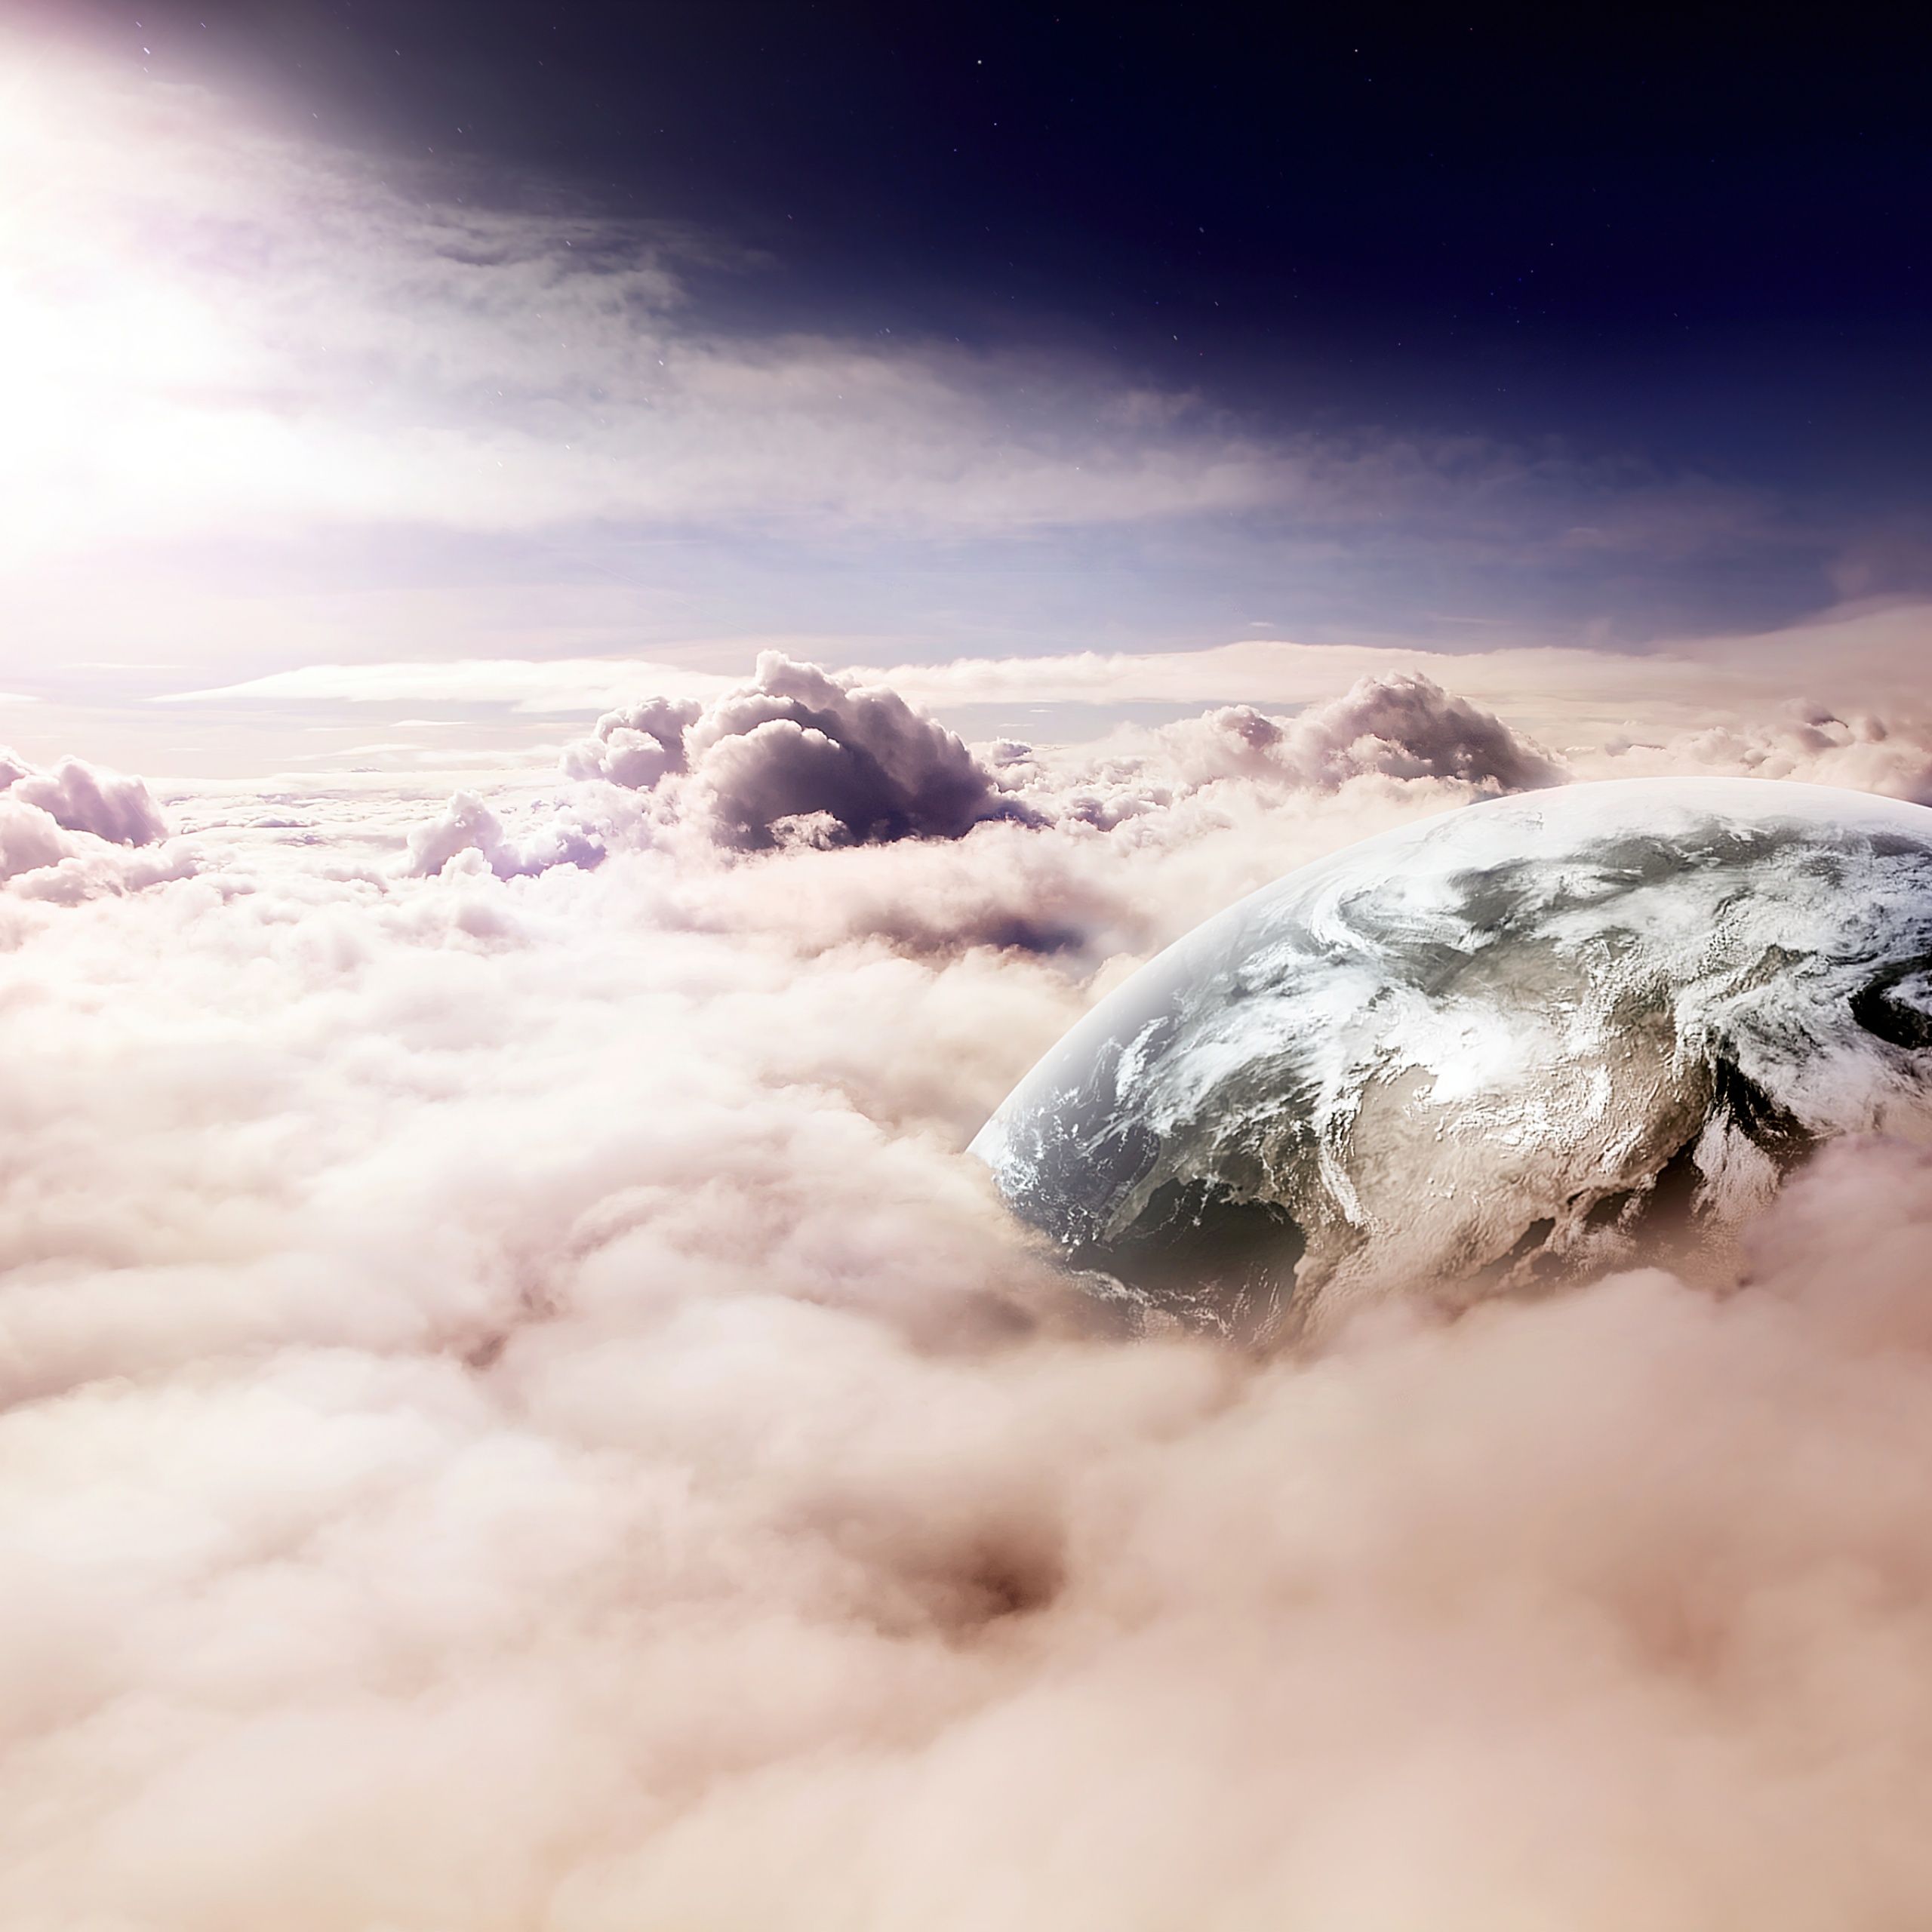 The earth in the clouds - Star Trek, Earth, cloud